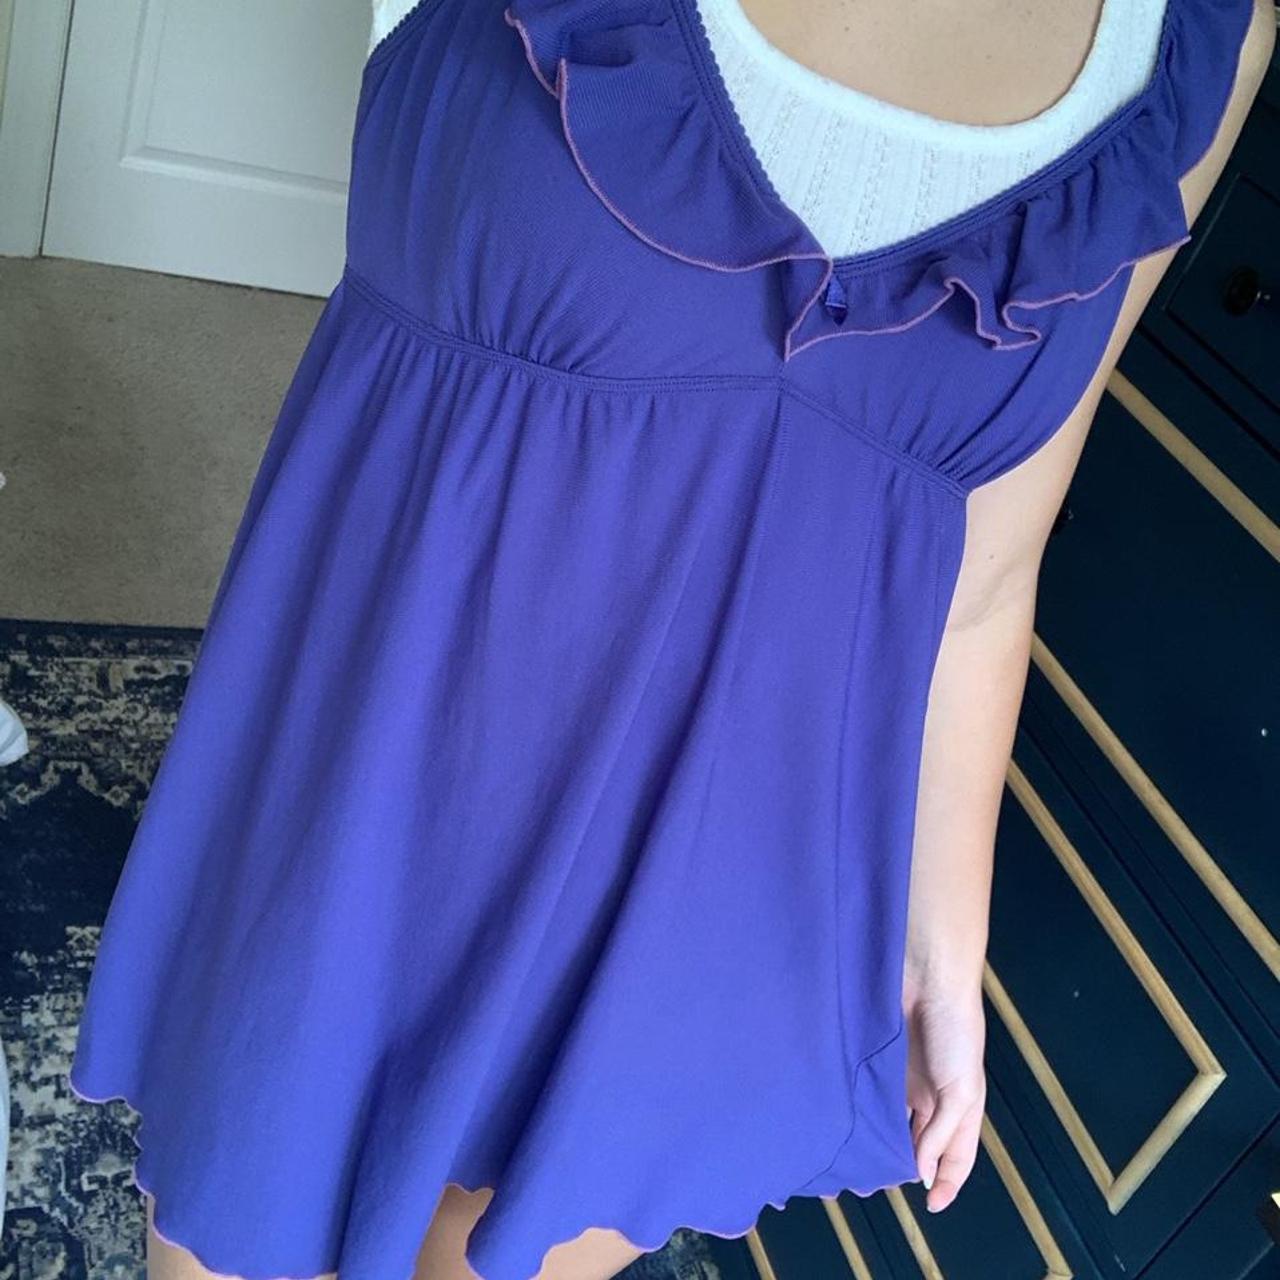 Smart and Sexy Women's Purple and Pink Dress